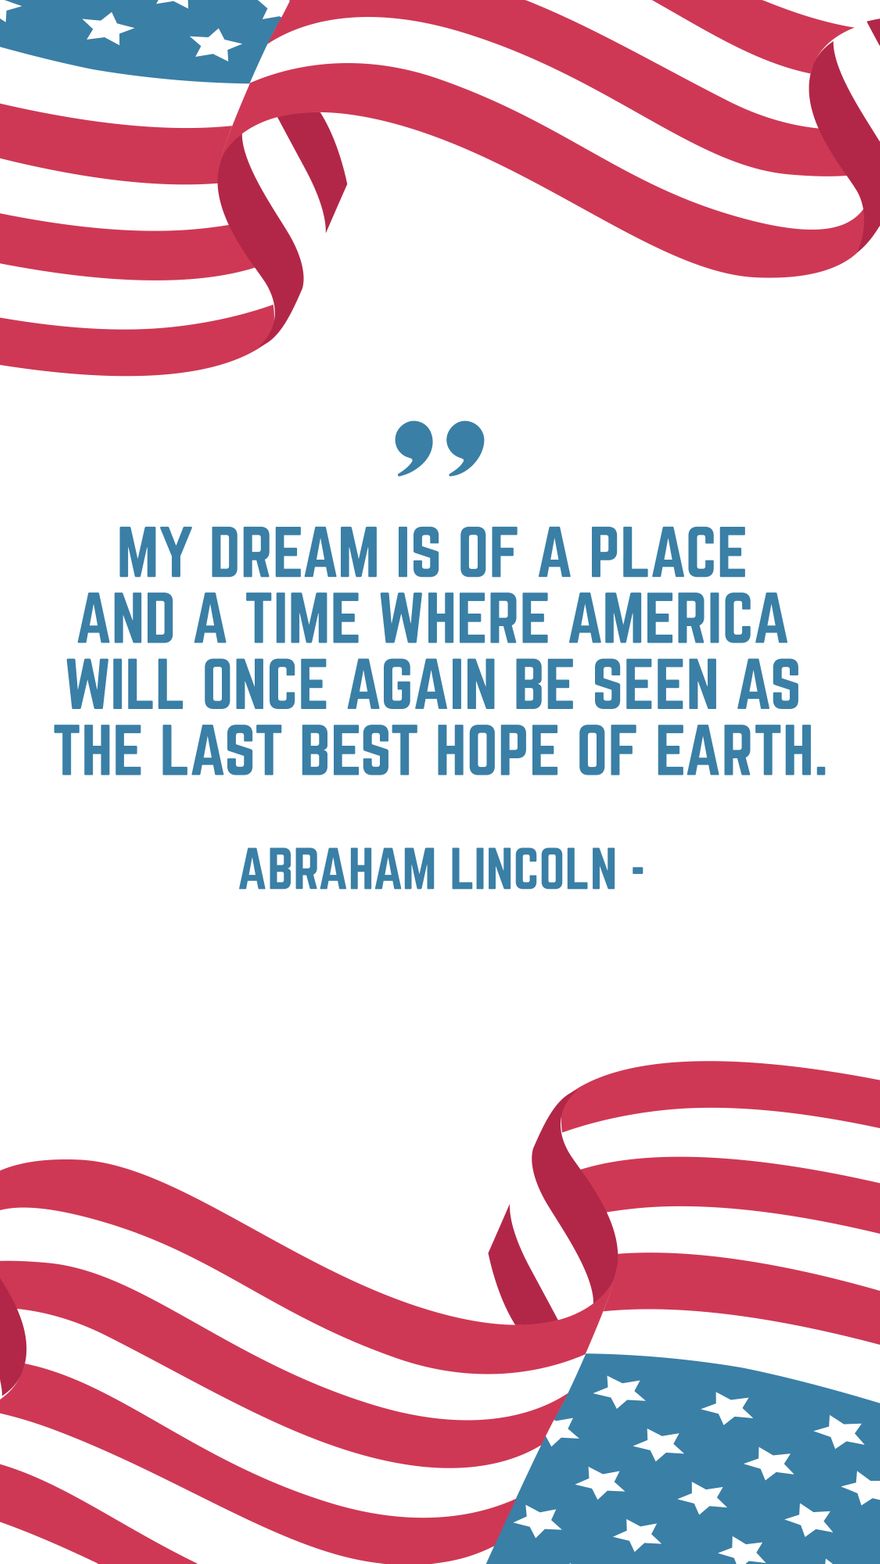 Abraham Lincoln - My dream is of a place and a time where America will once again be seen as the last best hope of earth.